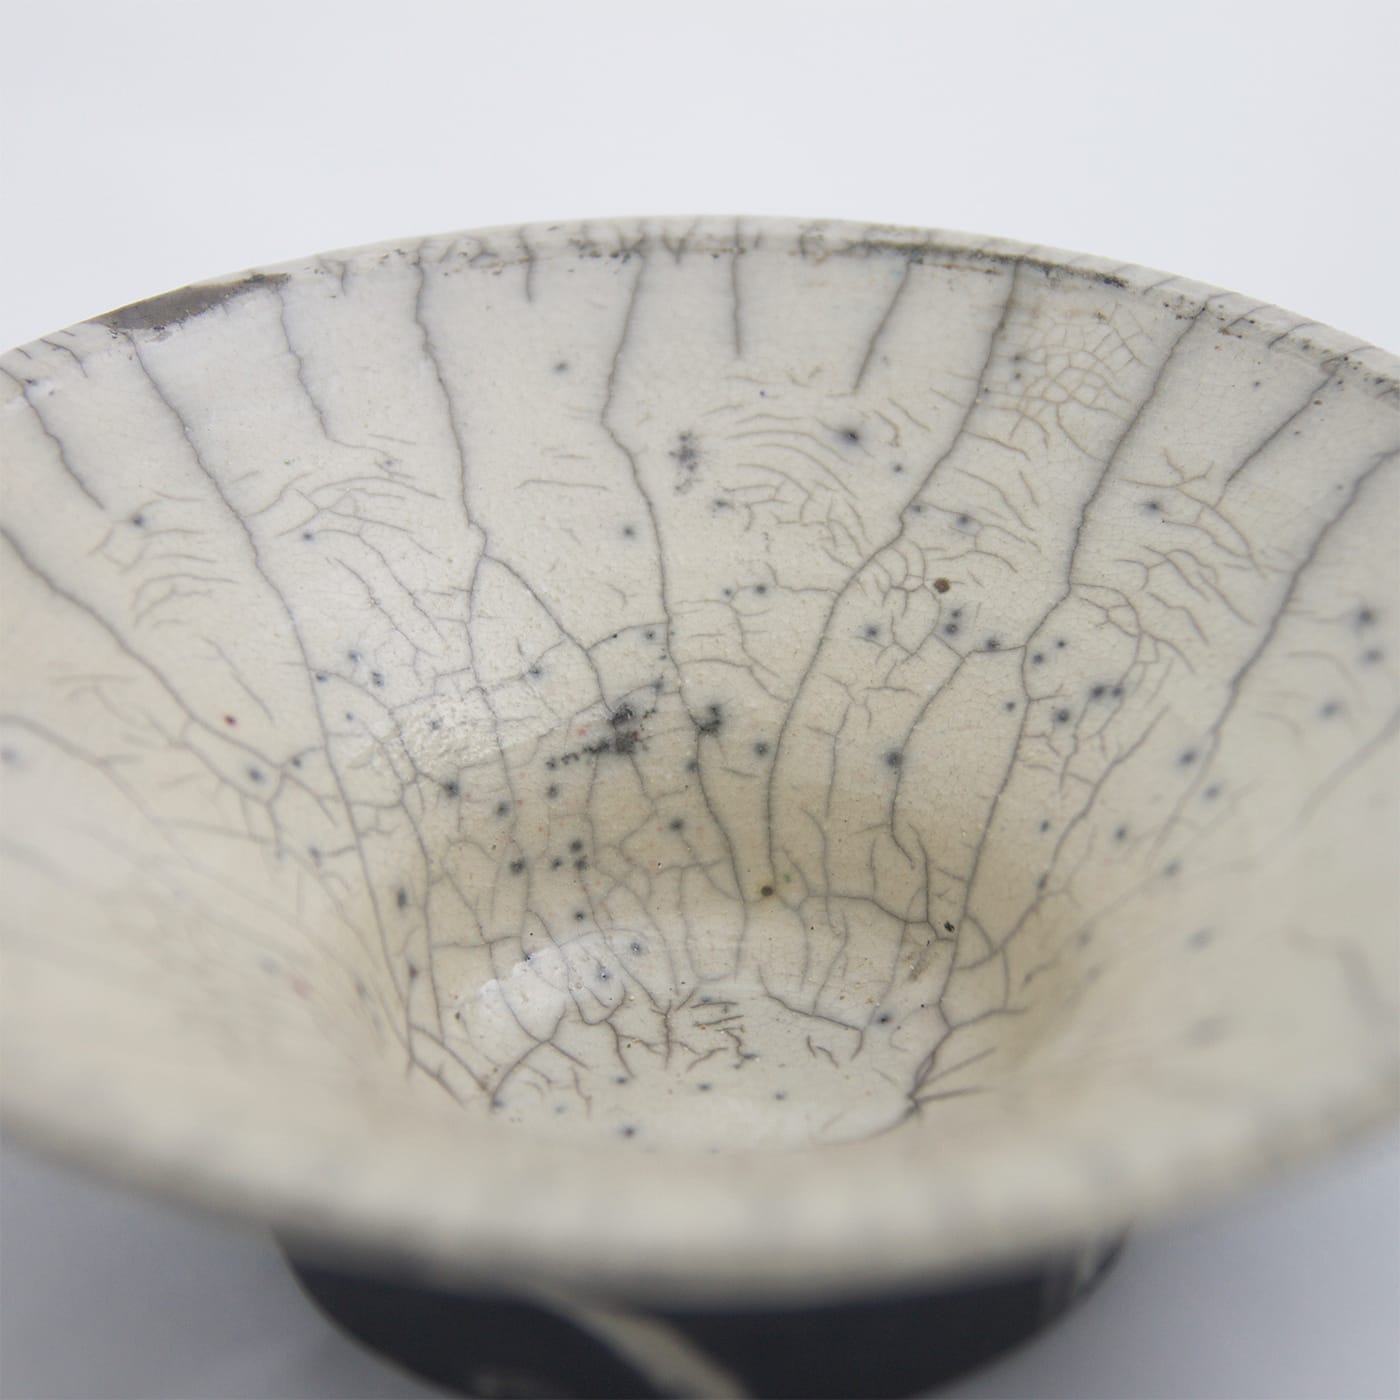 Cratere Bowl - Laab